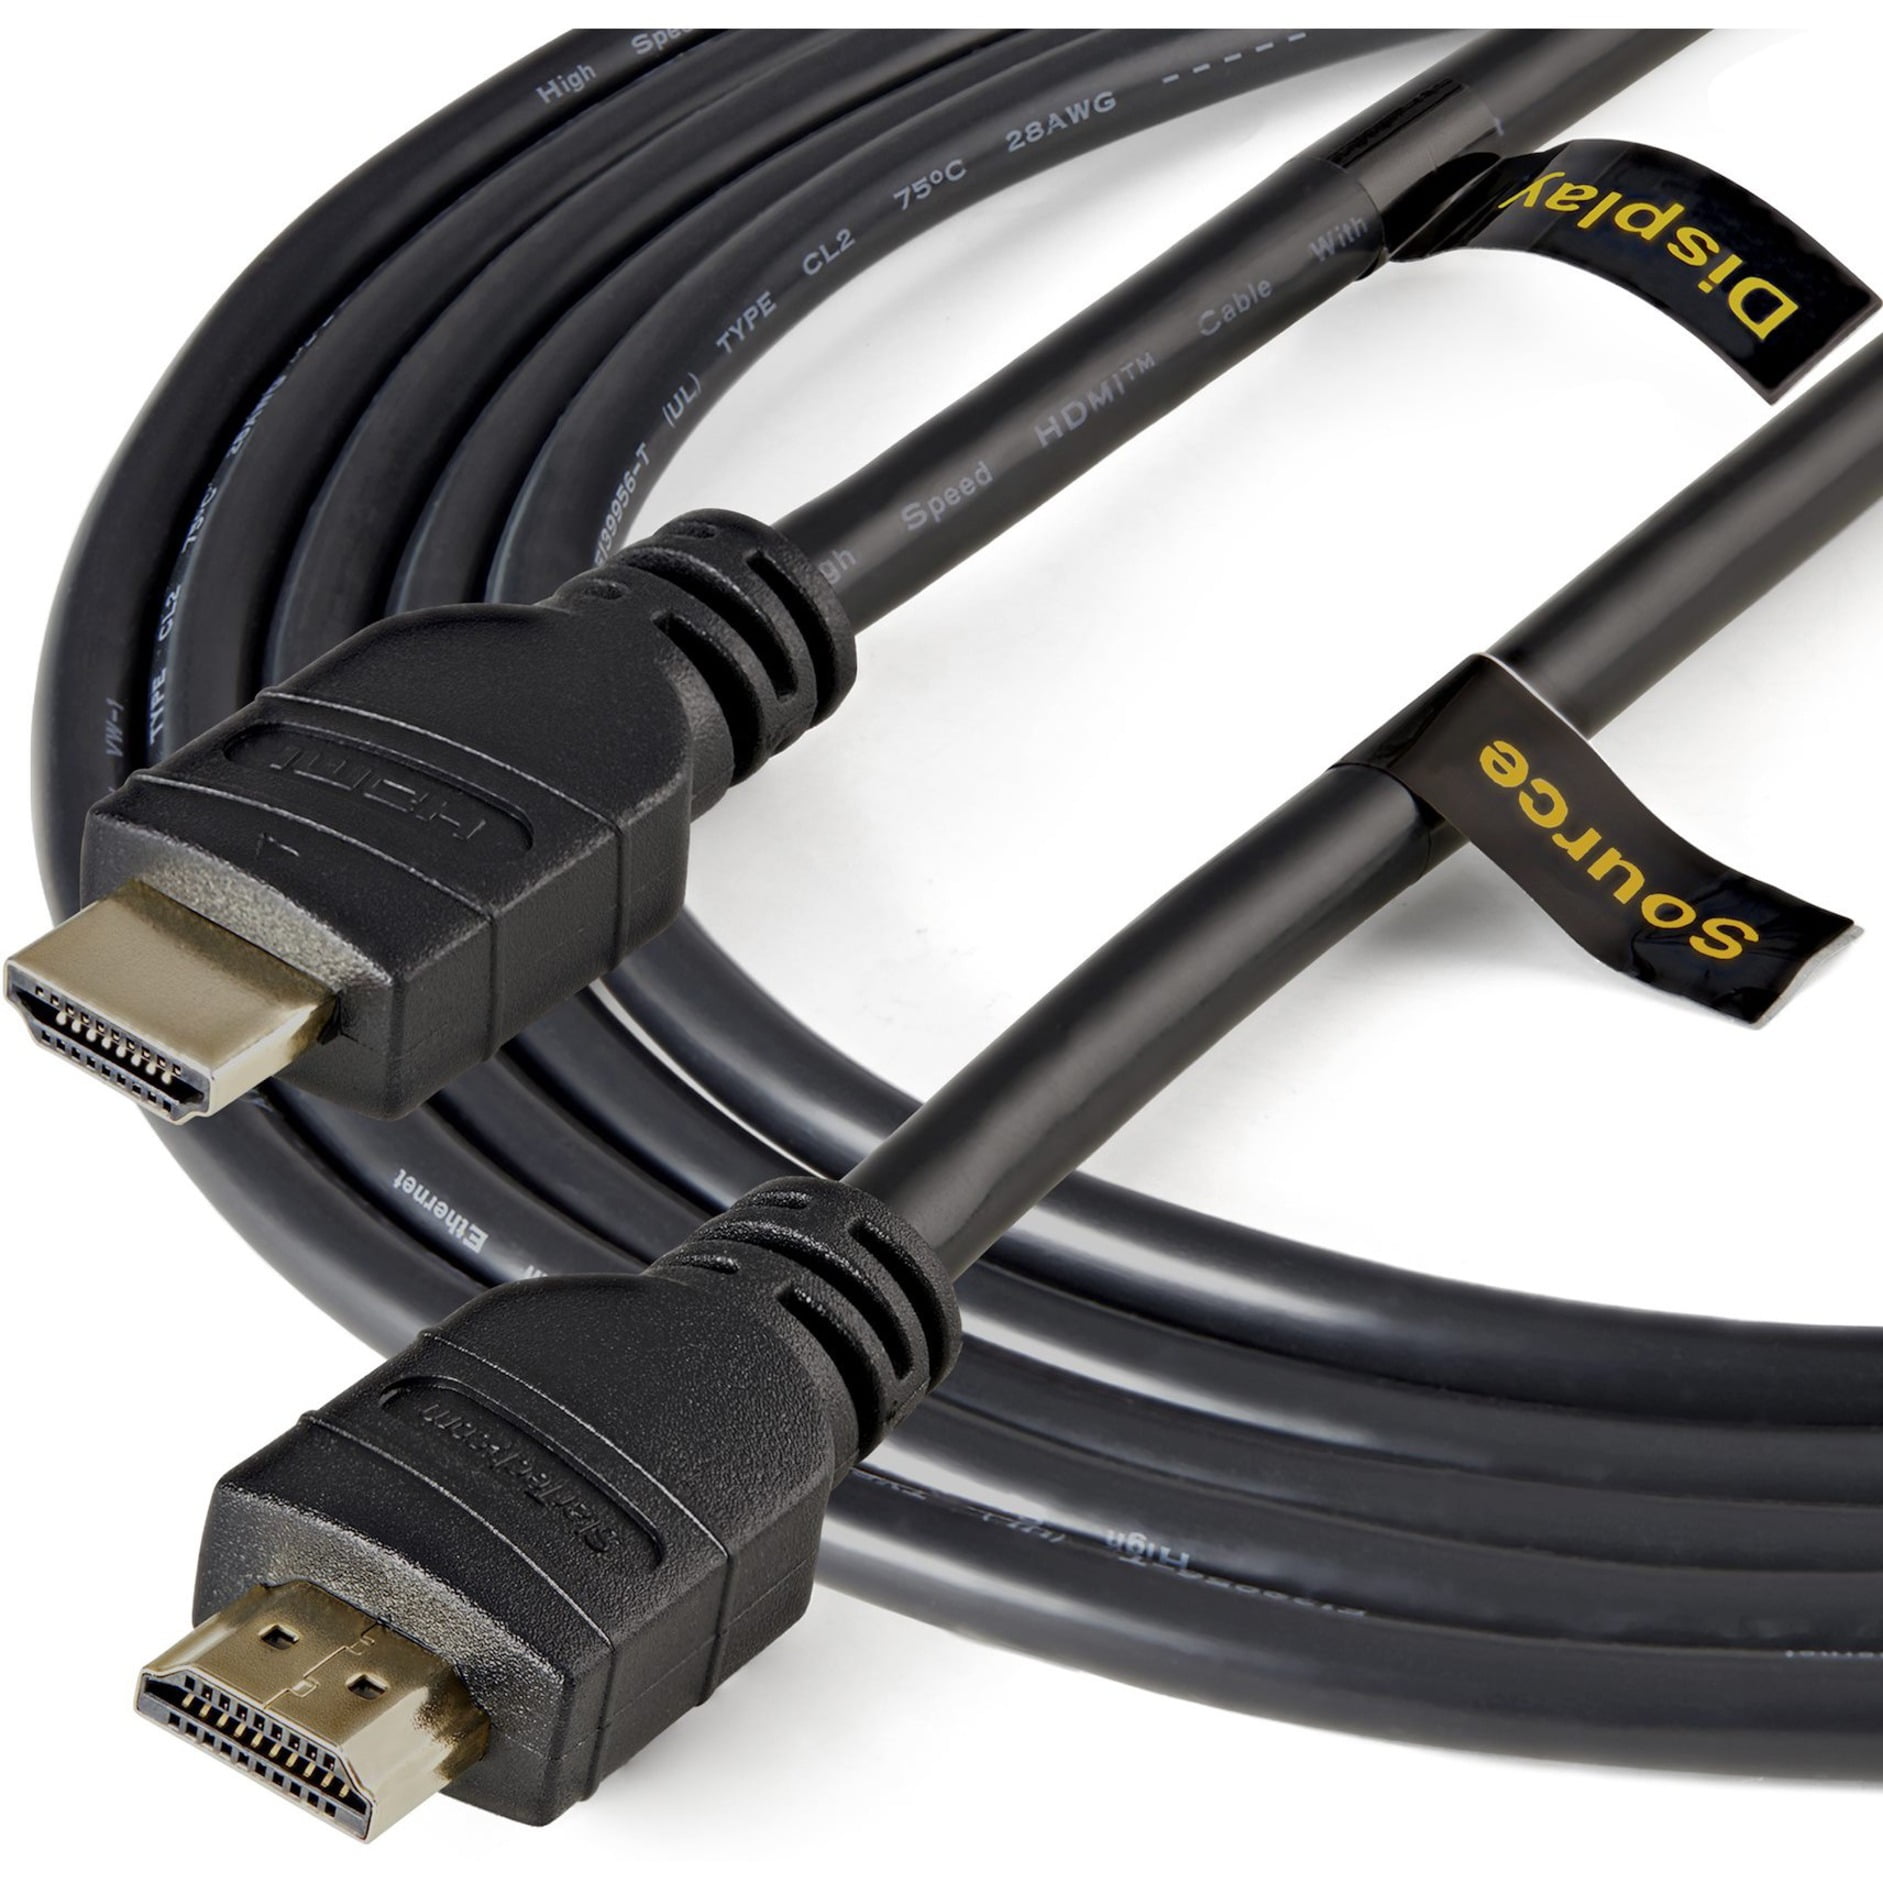 StarTech.com 5m (15 ft) Active High Speed HDMI Cable - Ultra HD 4k x 2k  HDMI Cable - HDMI to HDMI M/M - 1080p - Audio Video Gold-Plated (HDMM5MA)